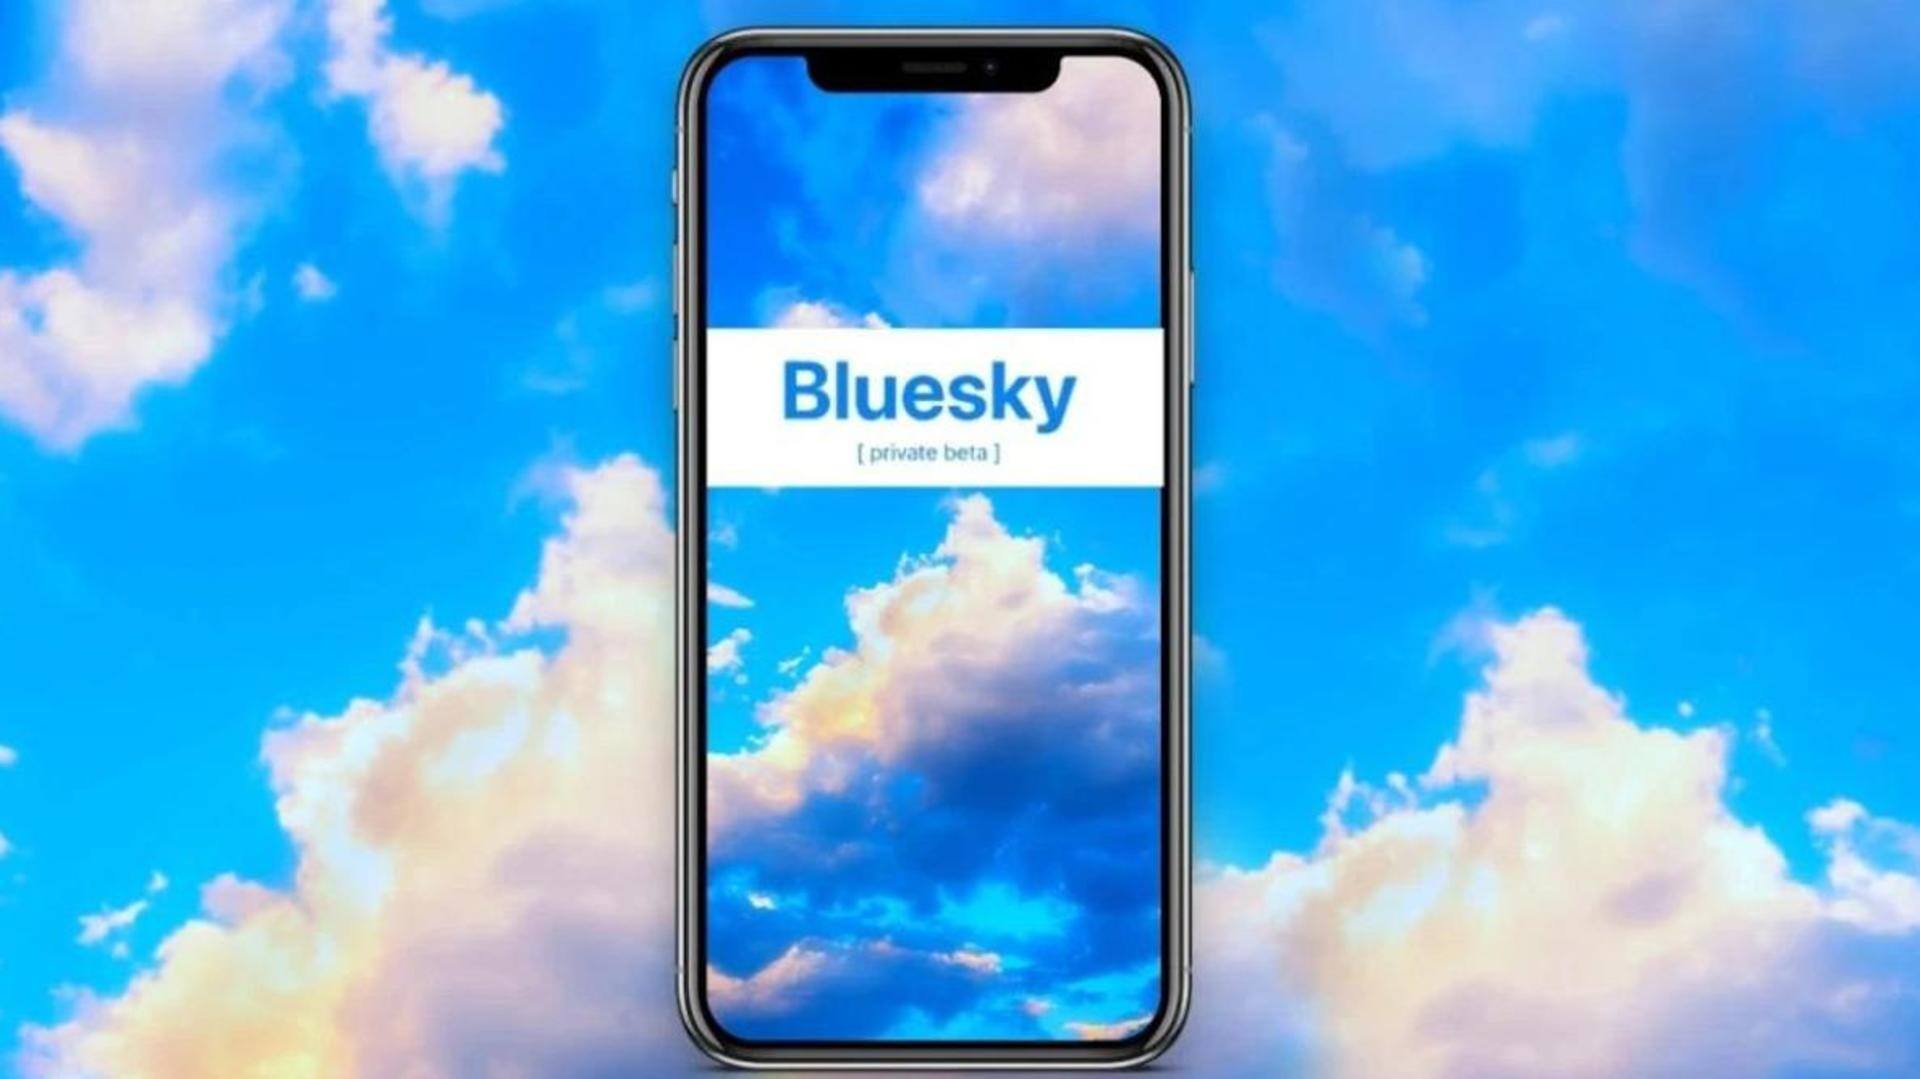 Twitter rival Bluesky halts new sign-ups: Here's why